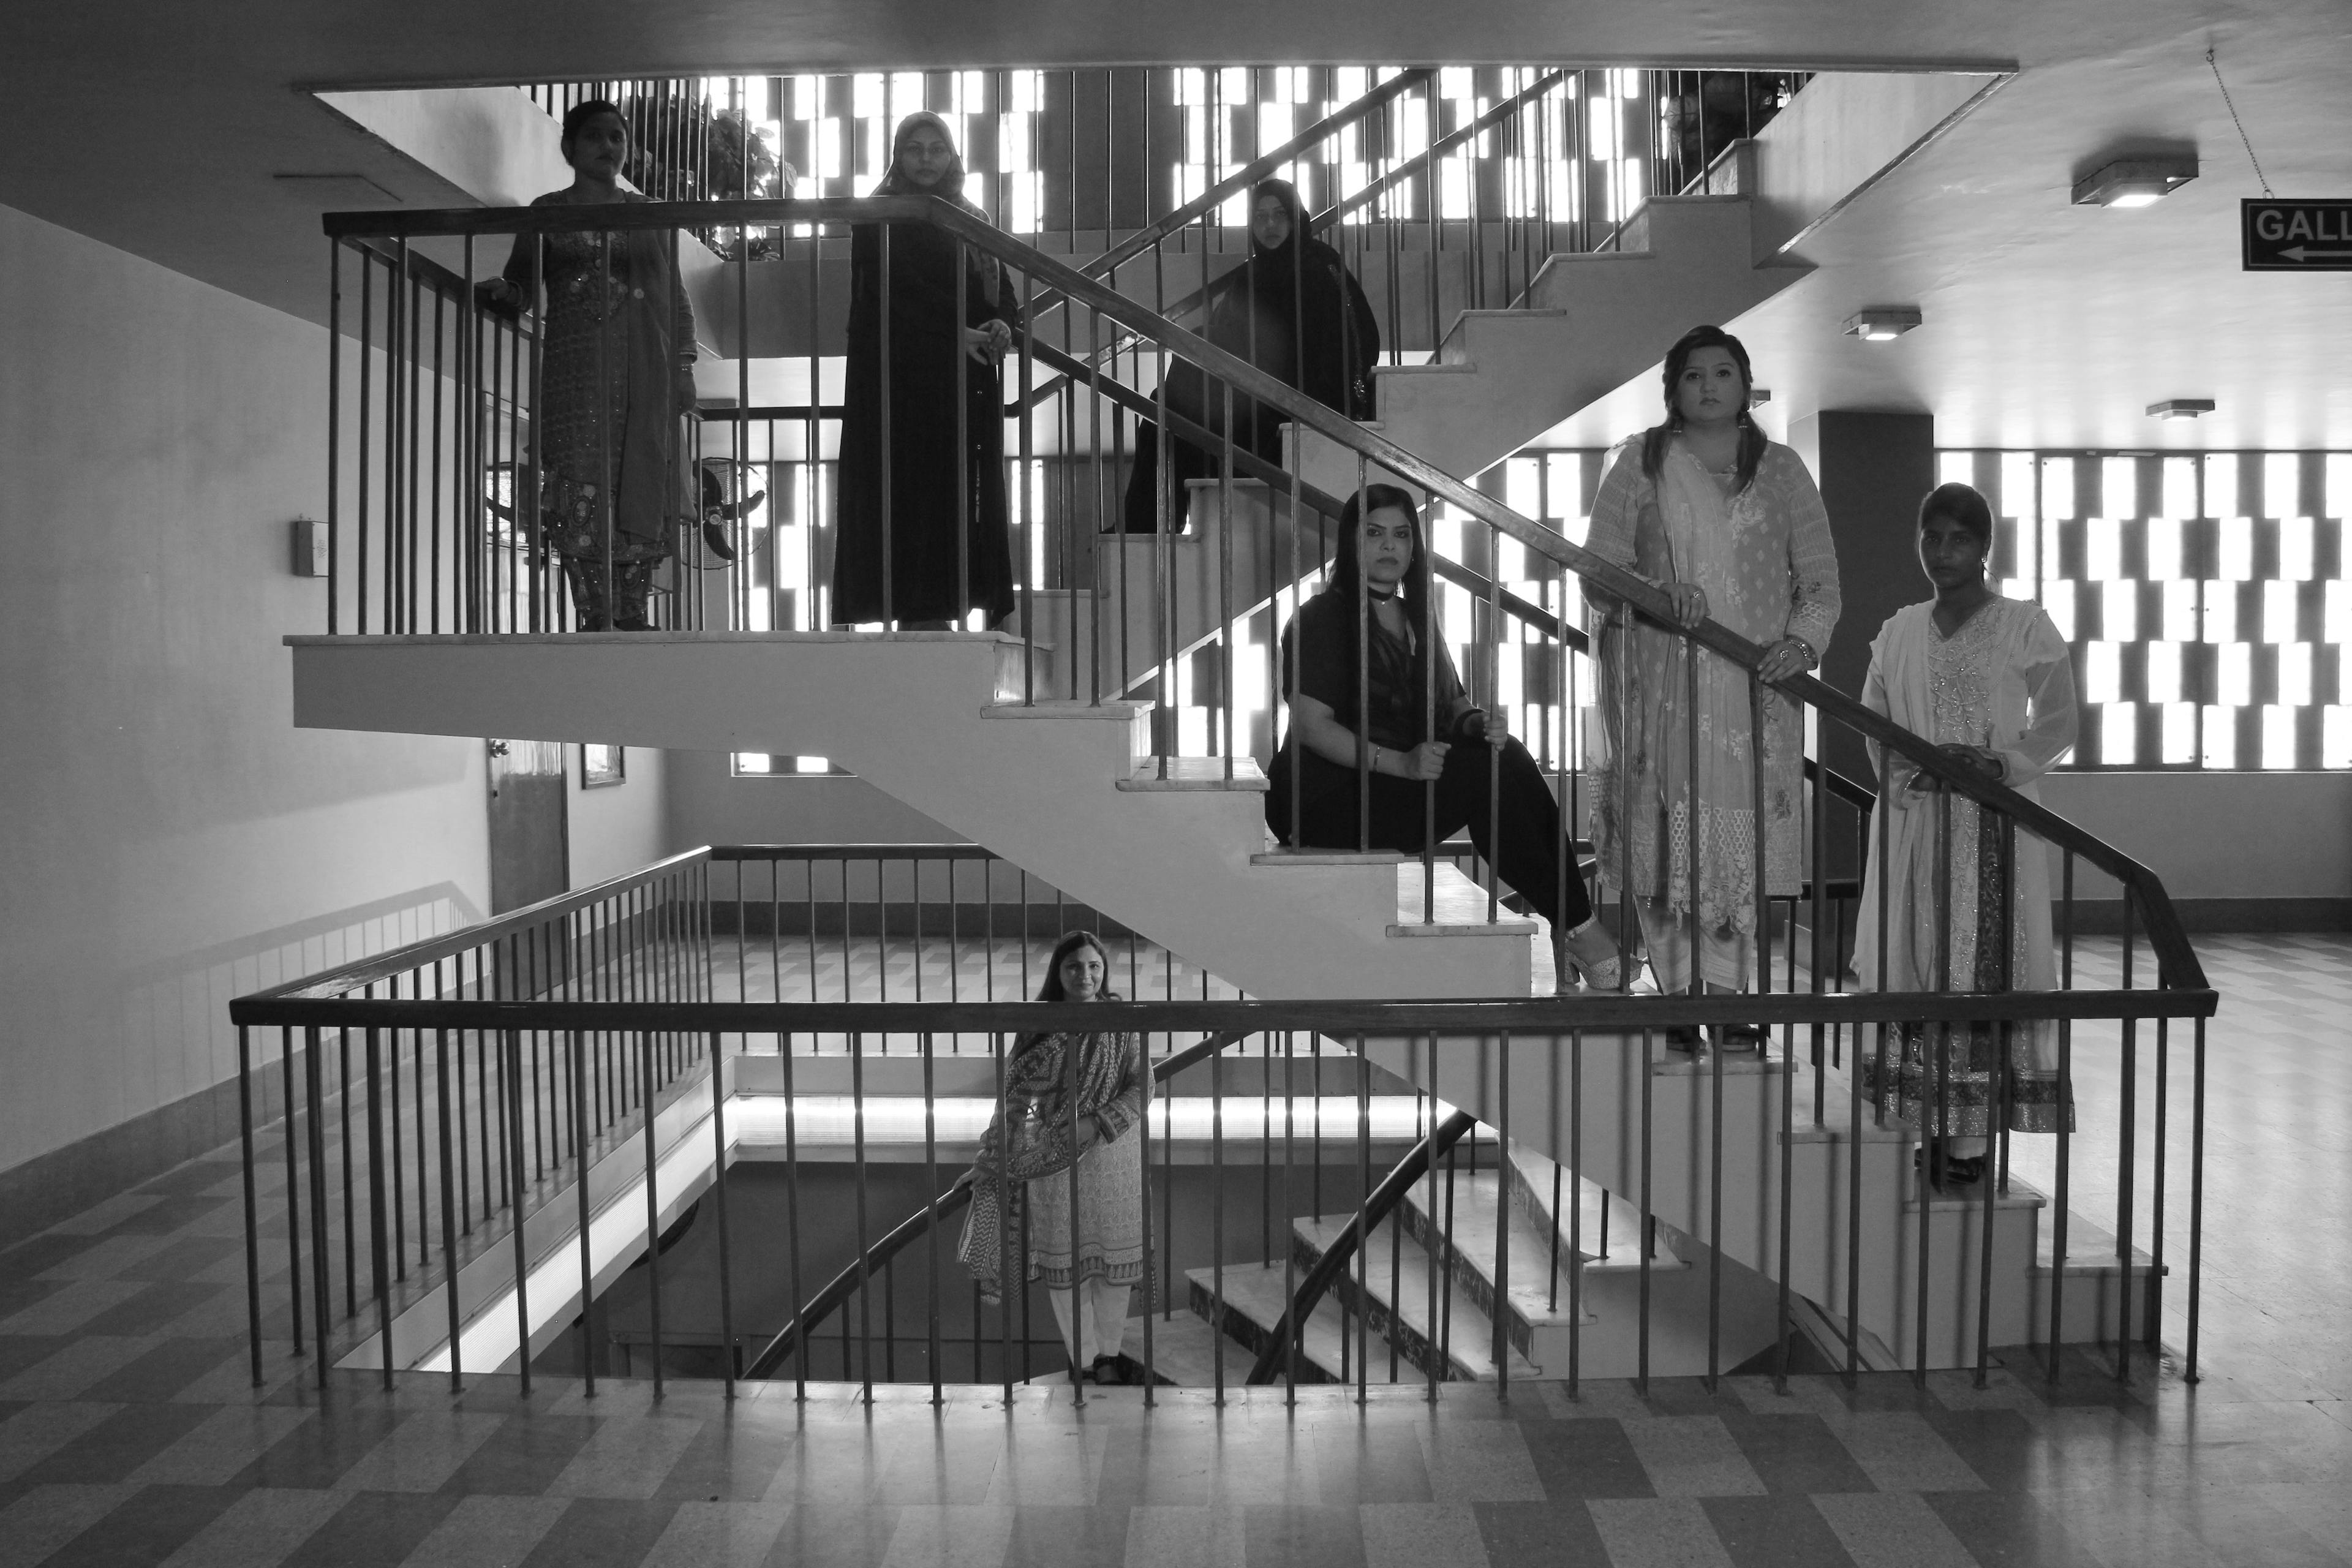 A black and white image of 7 people standing on the steps and landings of a u-shaped staircase inside of a building. Each person is looking directly at the camera. 